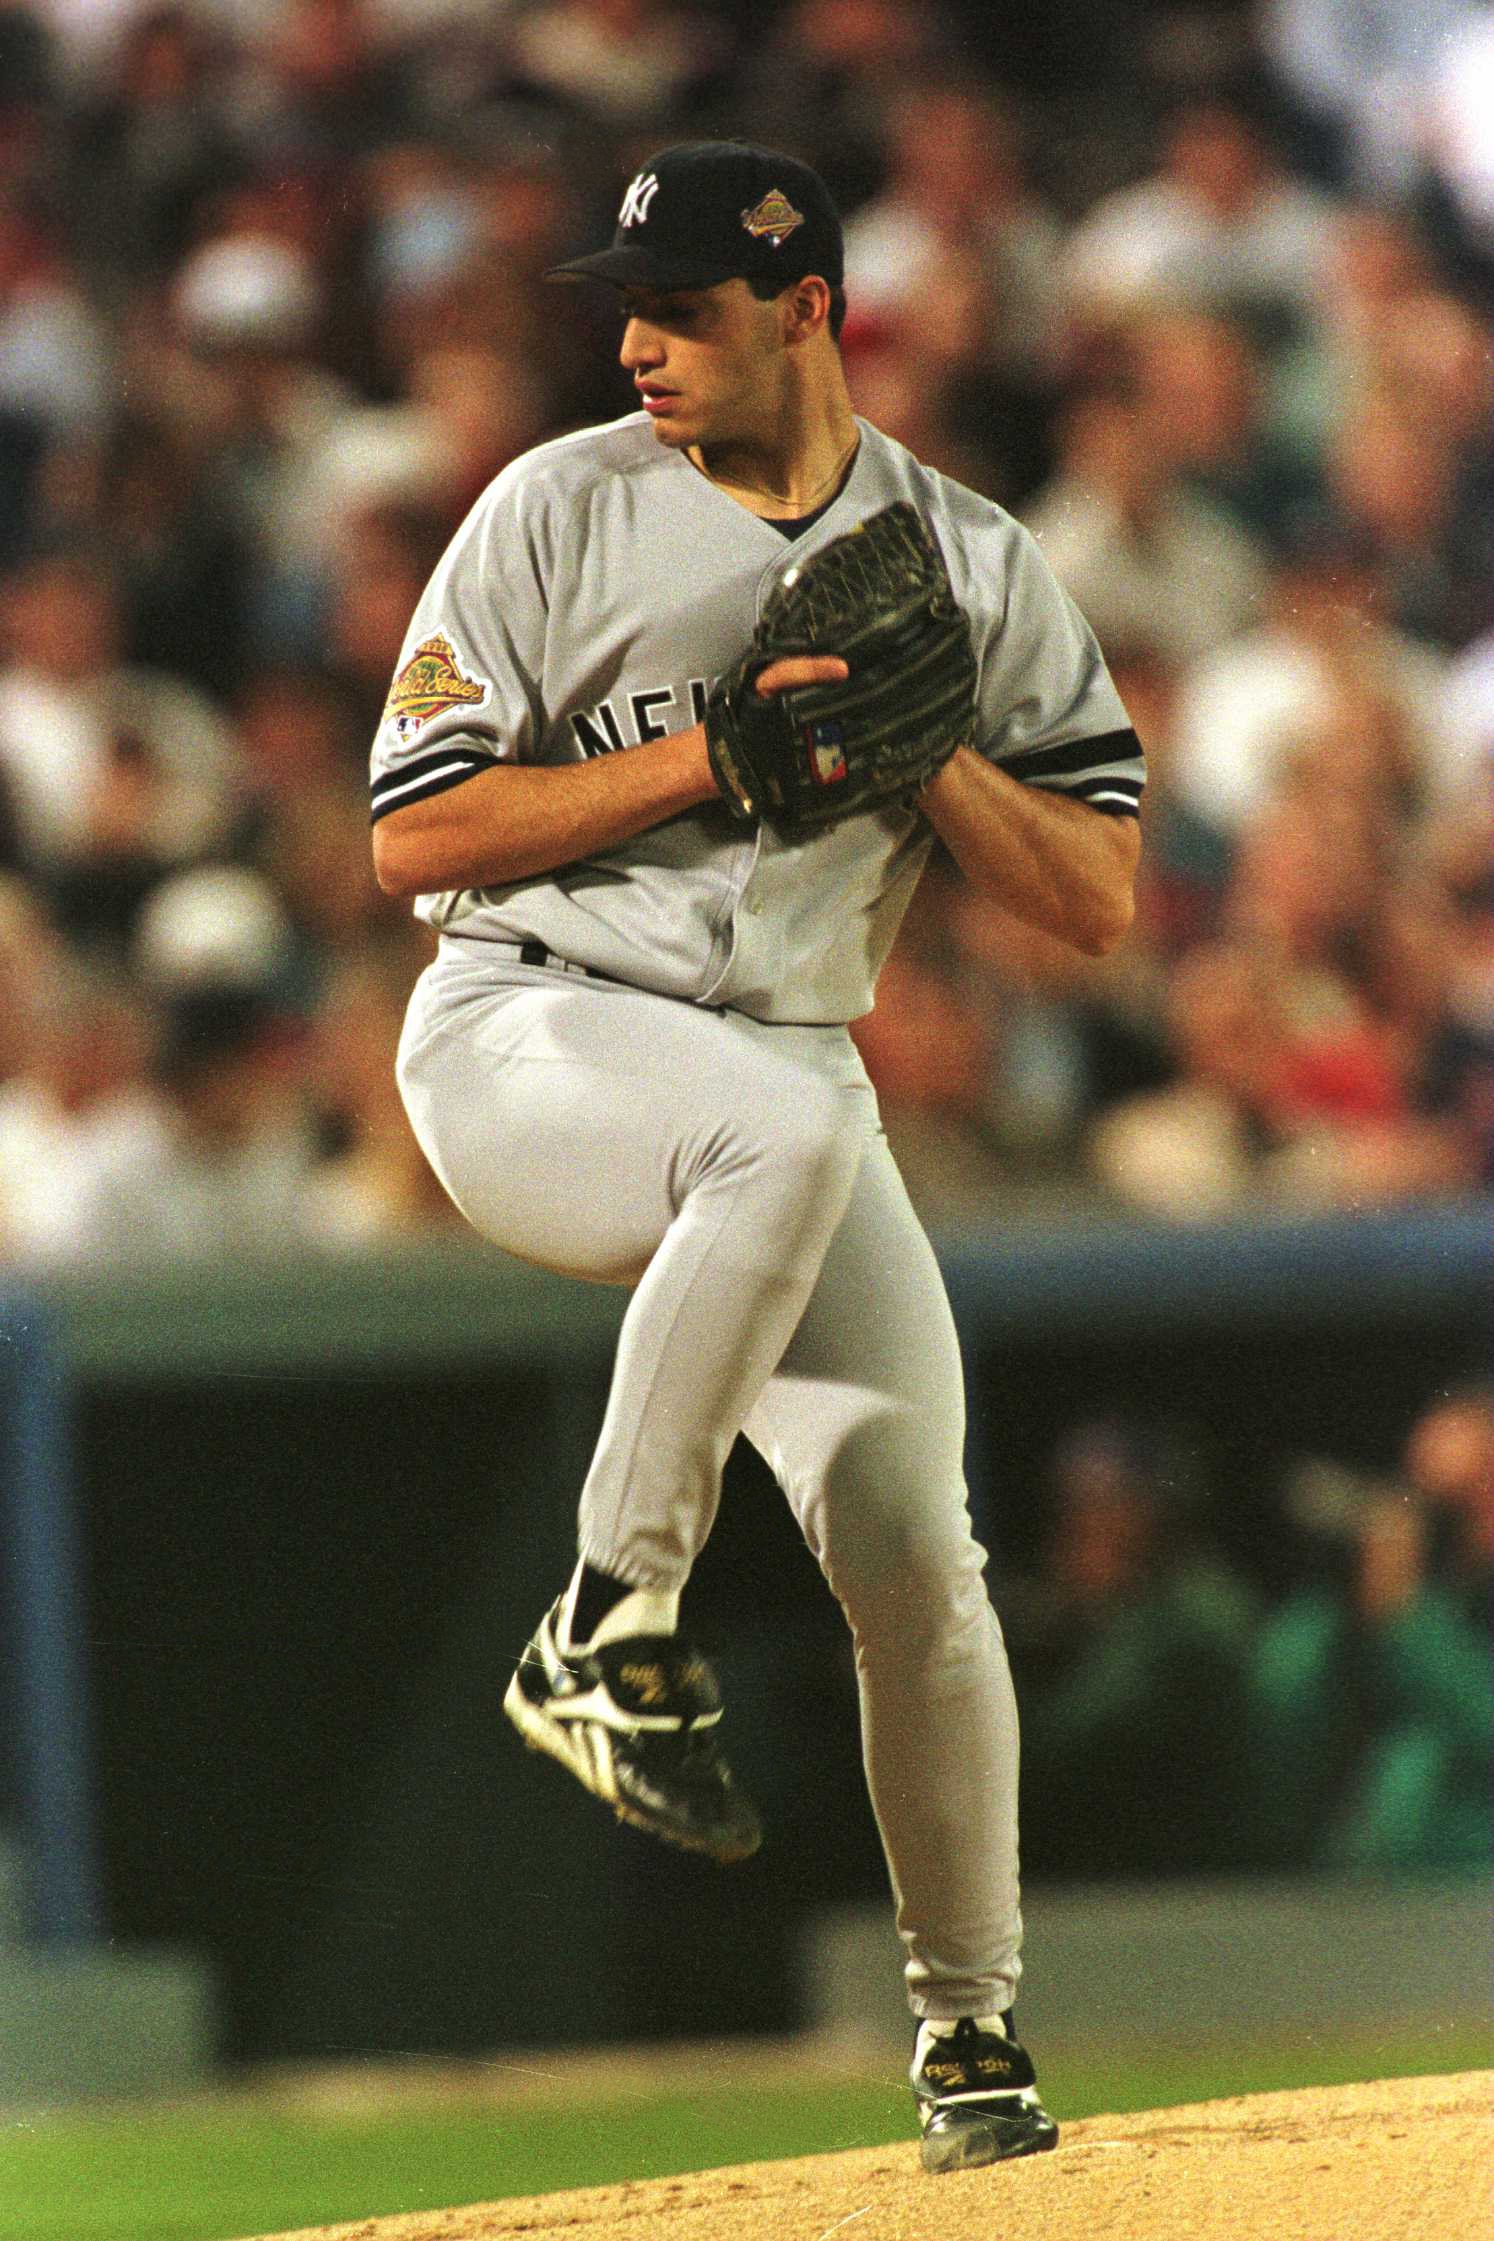 The 10 greatest moments of Andy Pettitte's career (#10-6